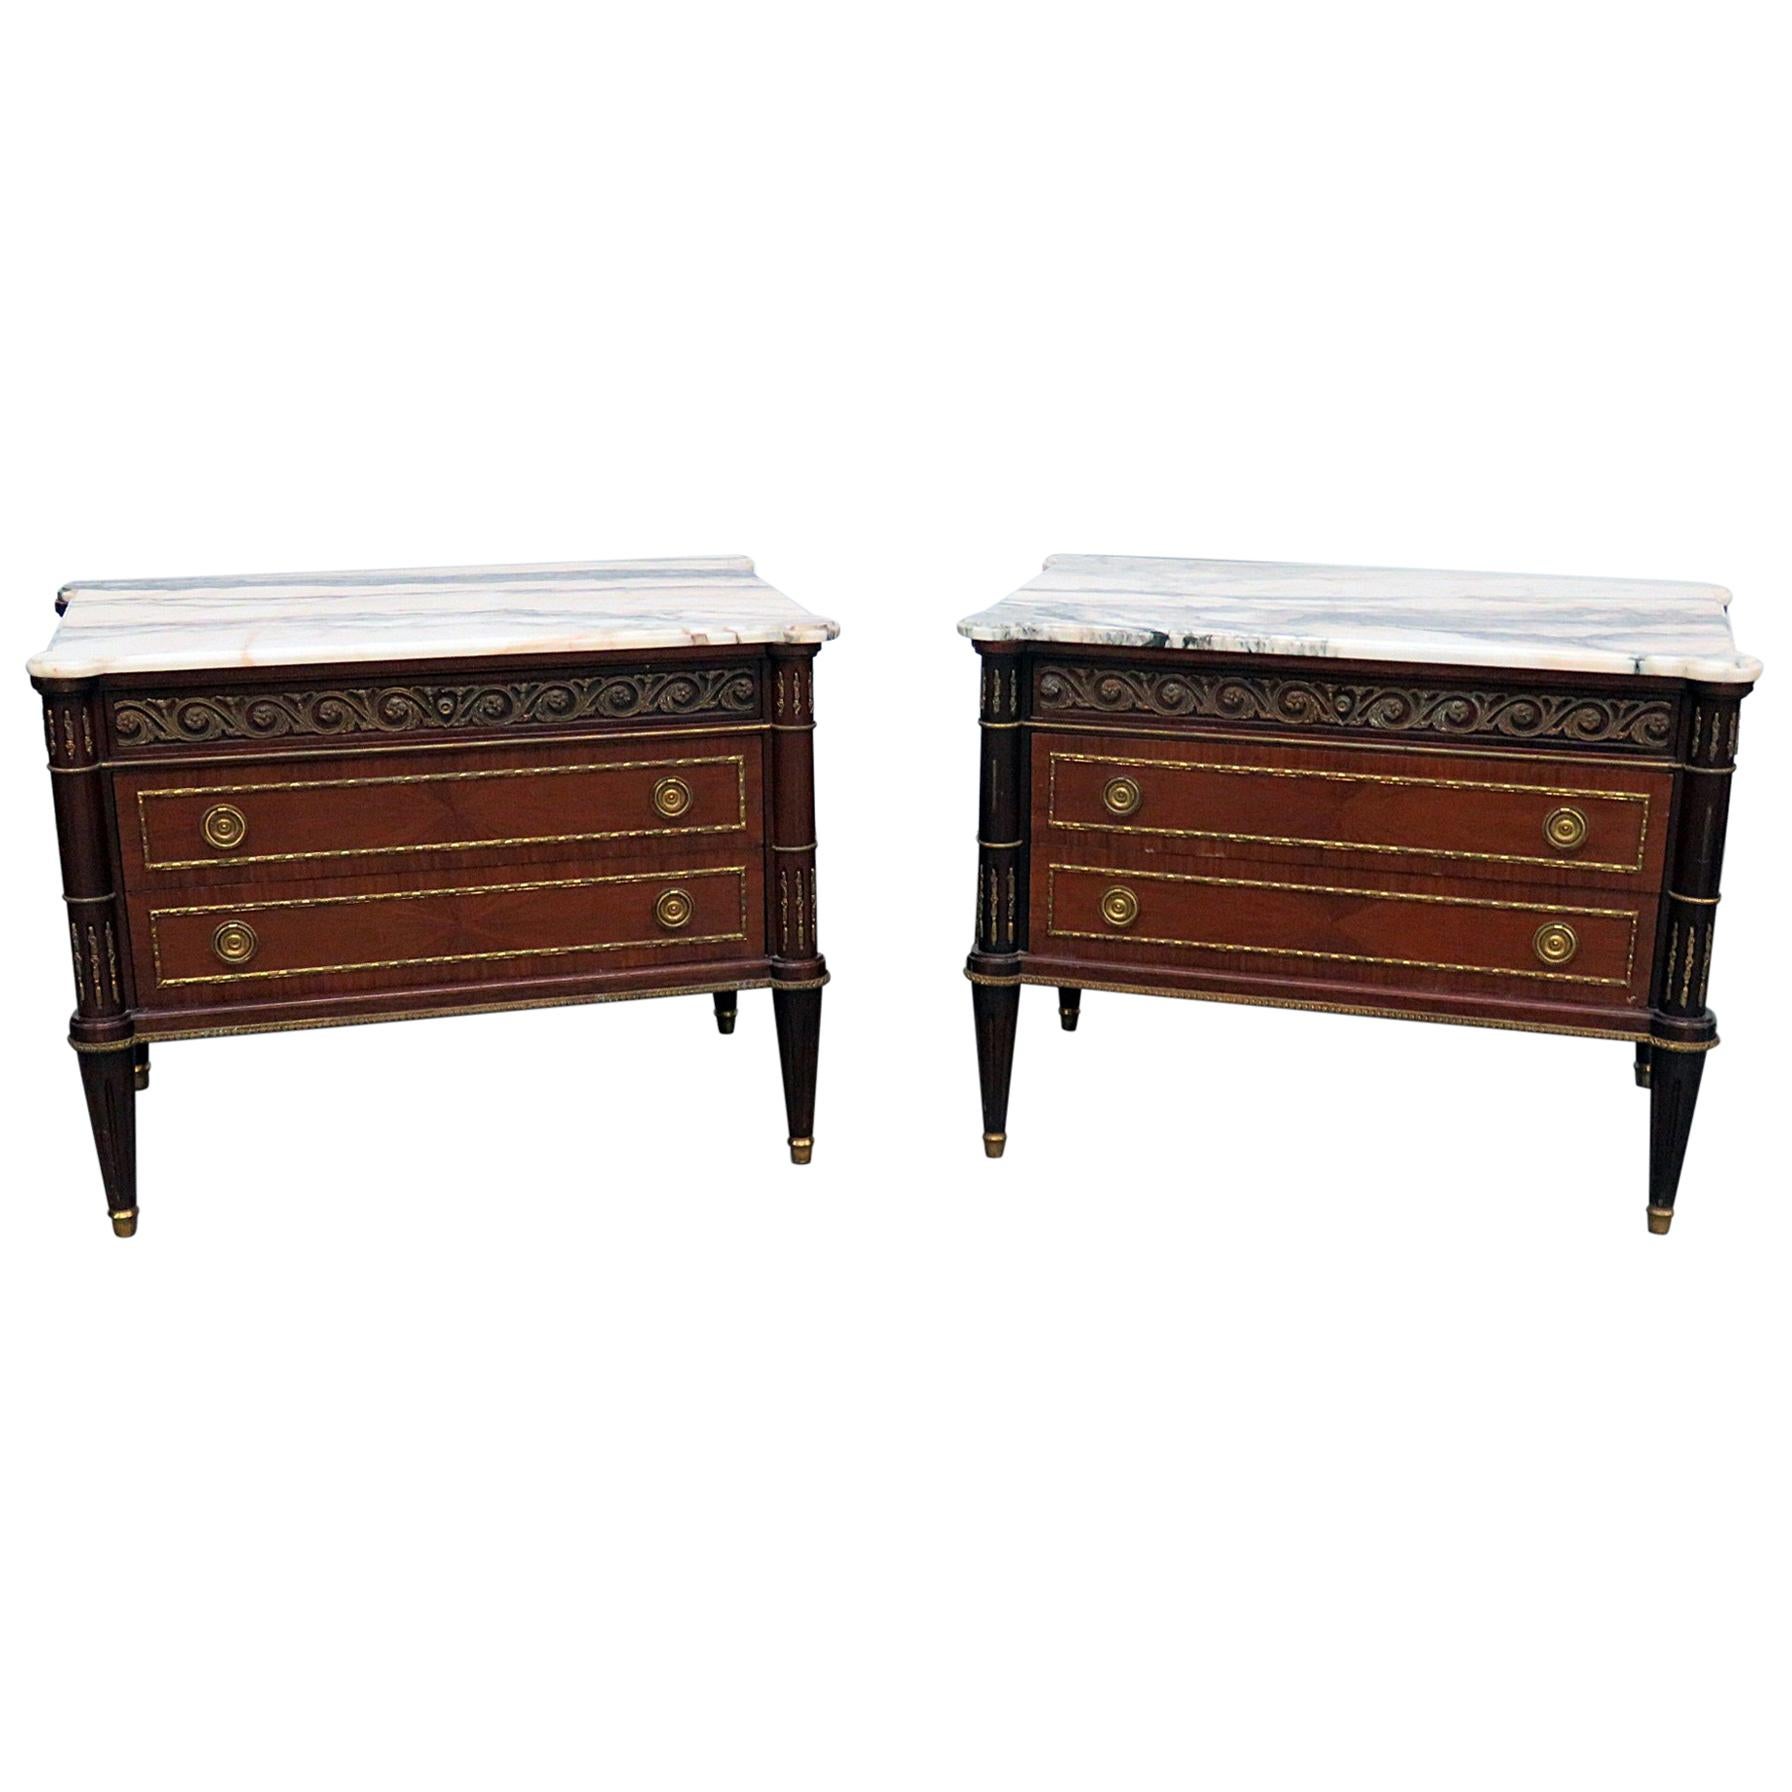 Pair of Directoire Style Marble-Top Commodes